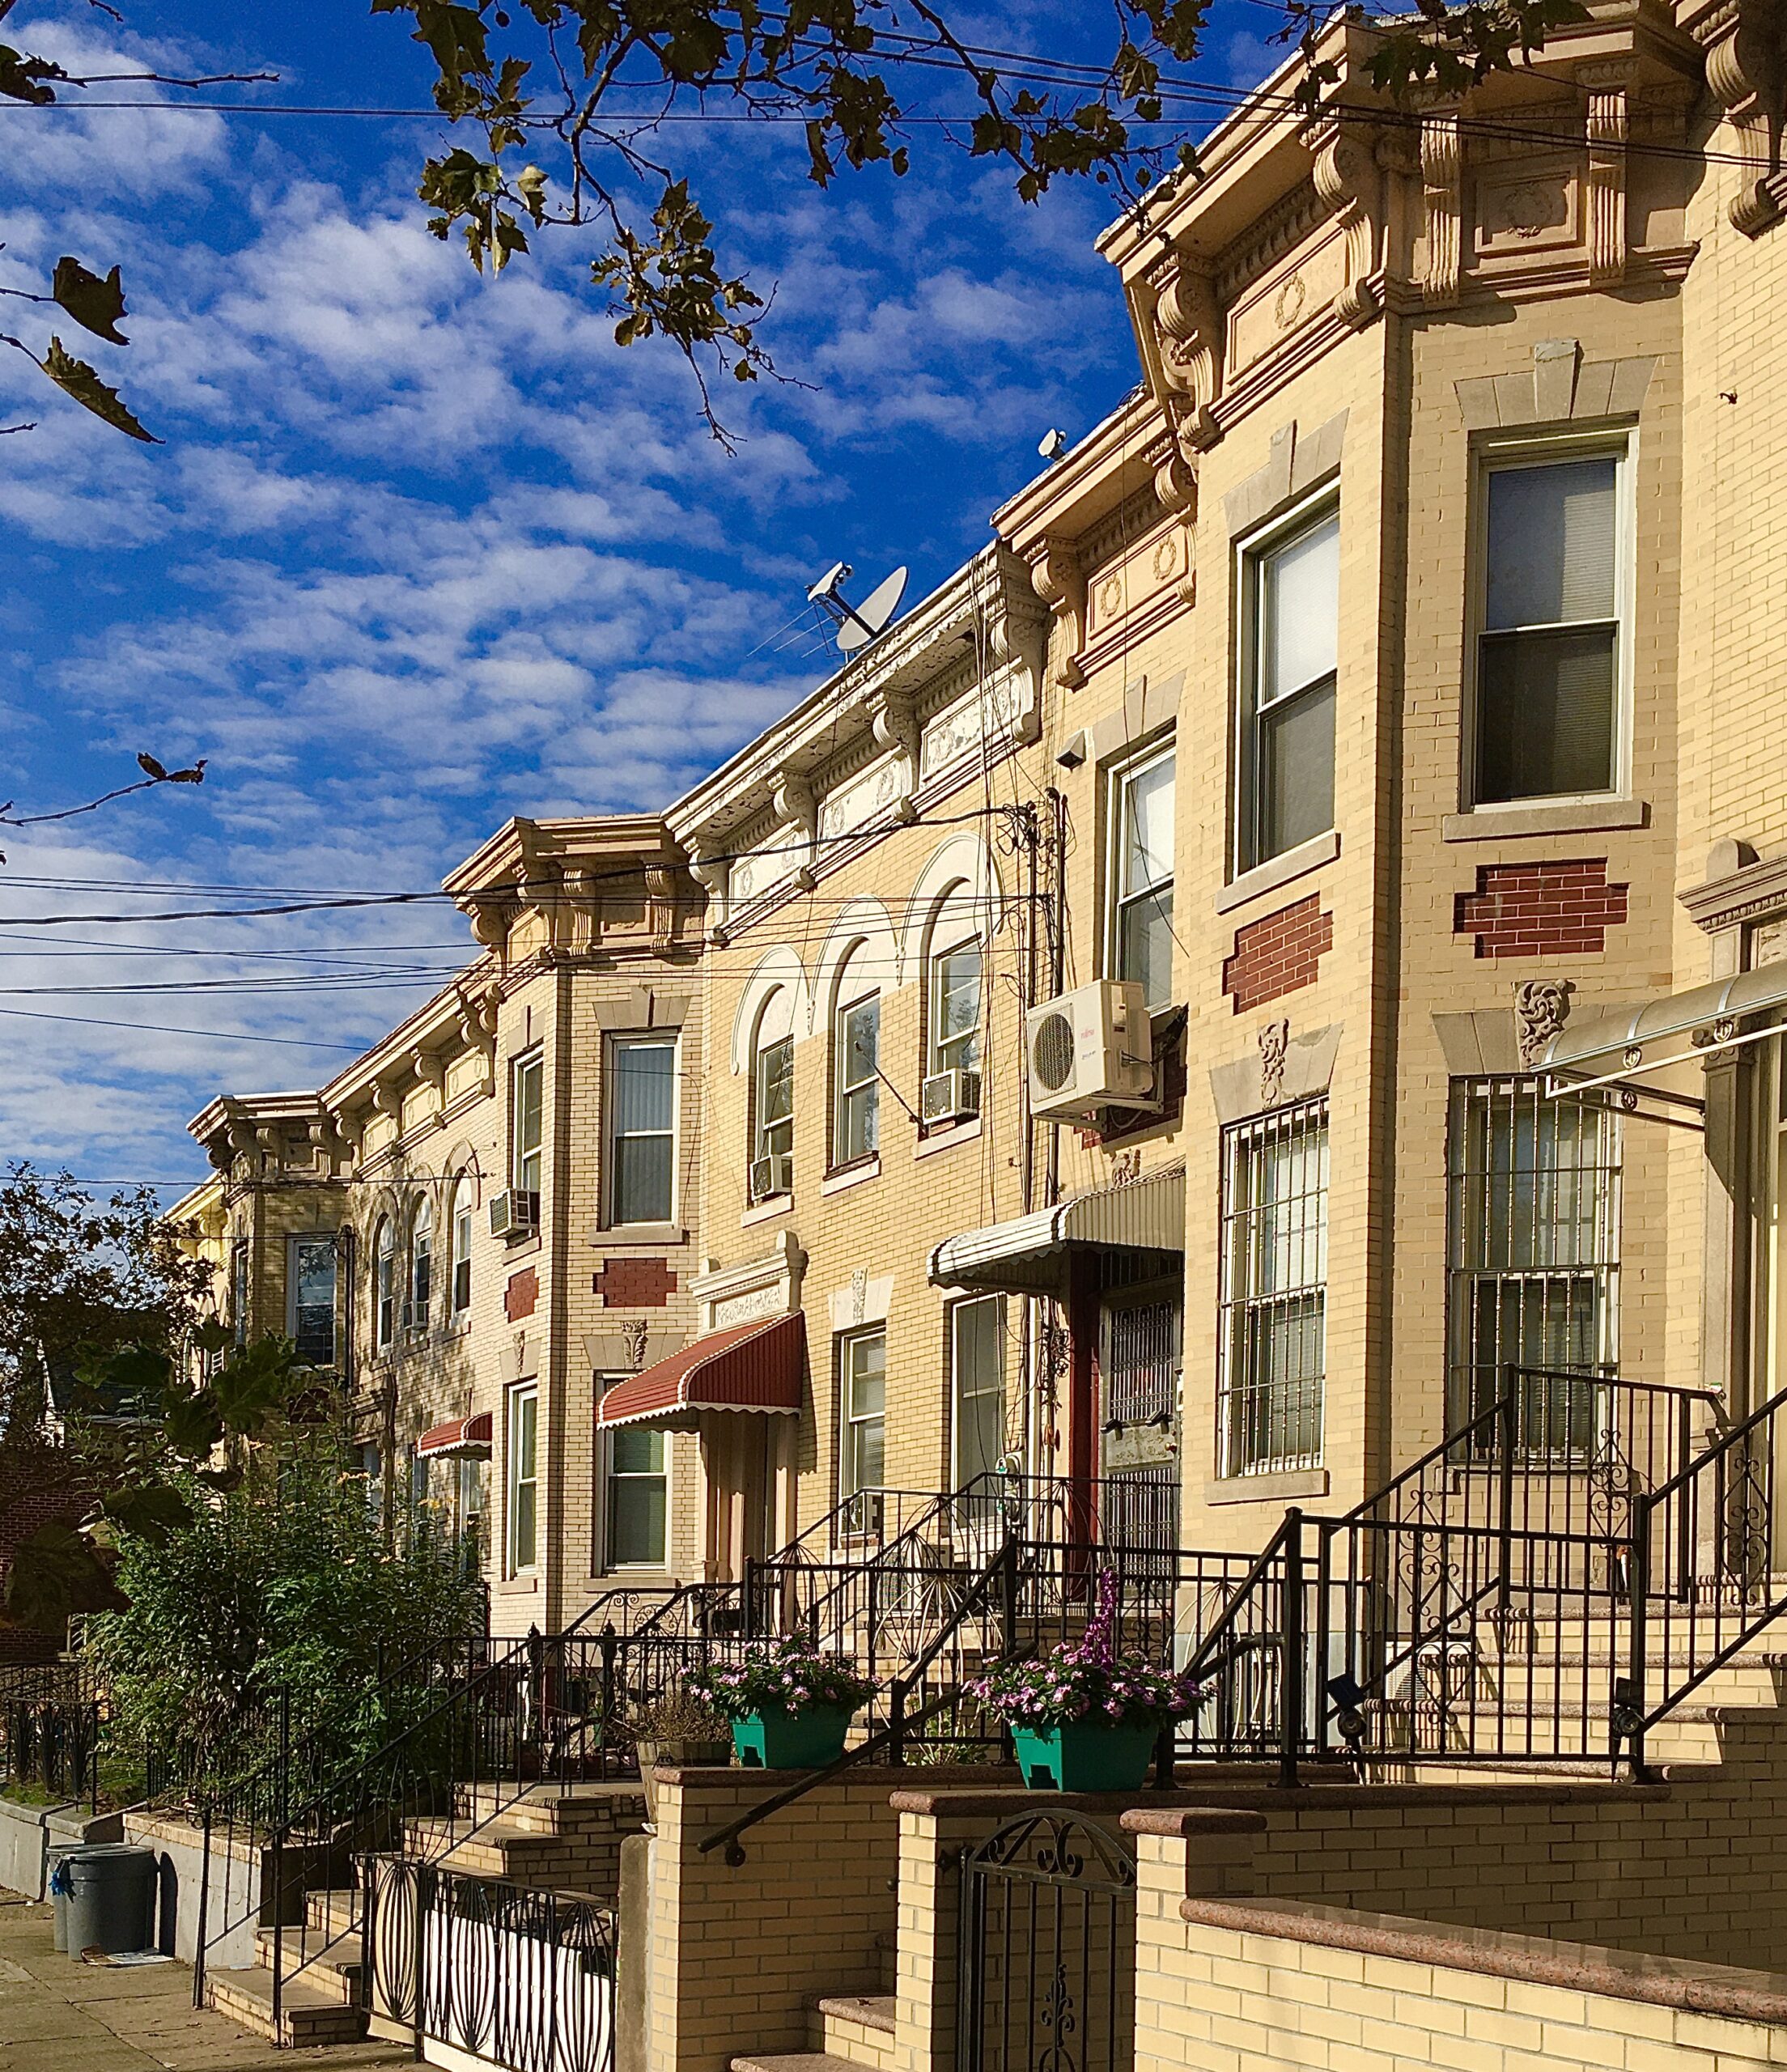 This row of old-fashioned houses can be found on 86th Street in Bensonhurst. Eagle photo by Lore Croghan